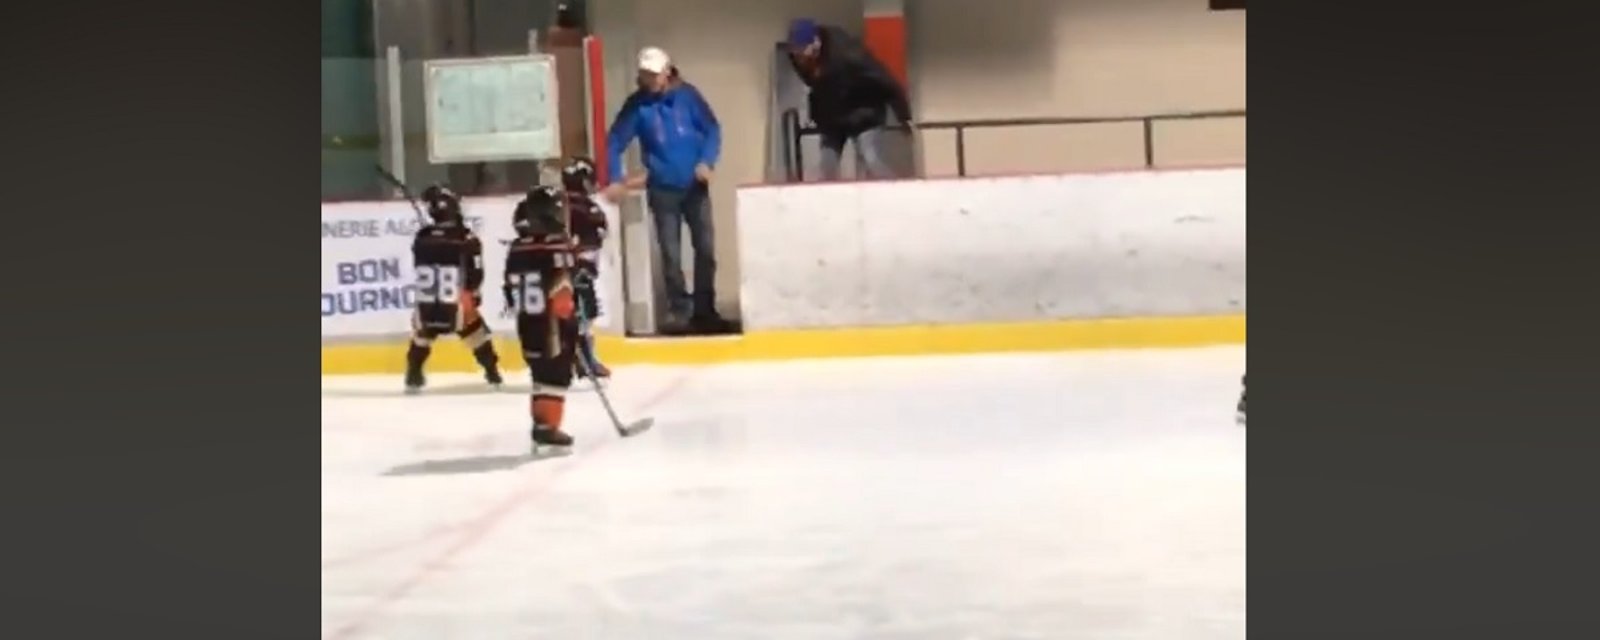 Awful video catches coach berating a young child during hockey game.